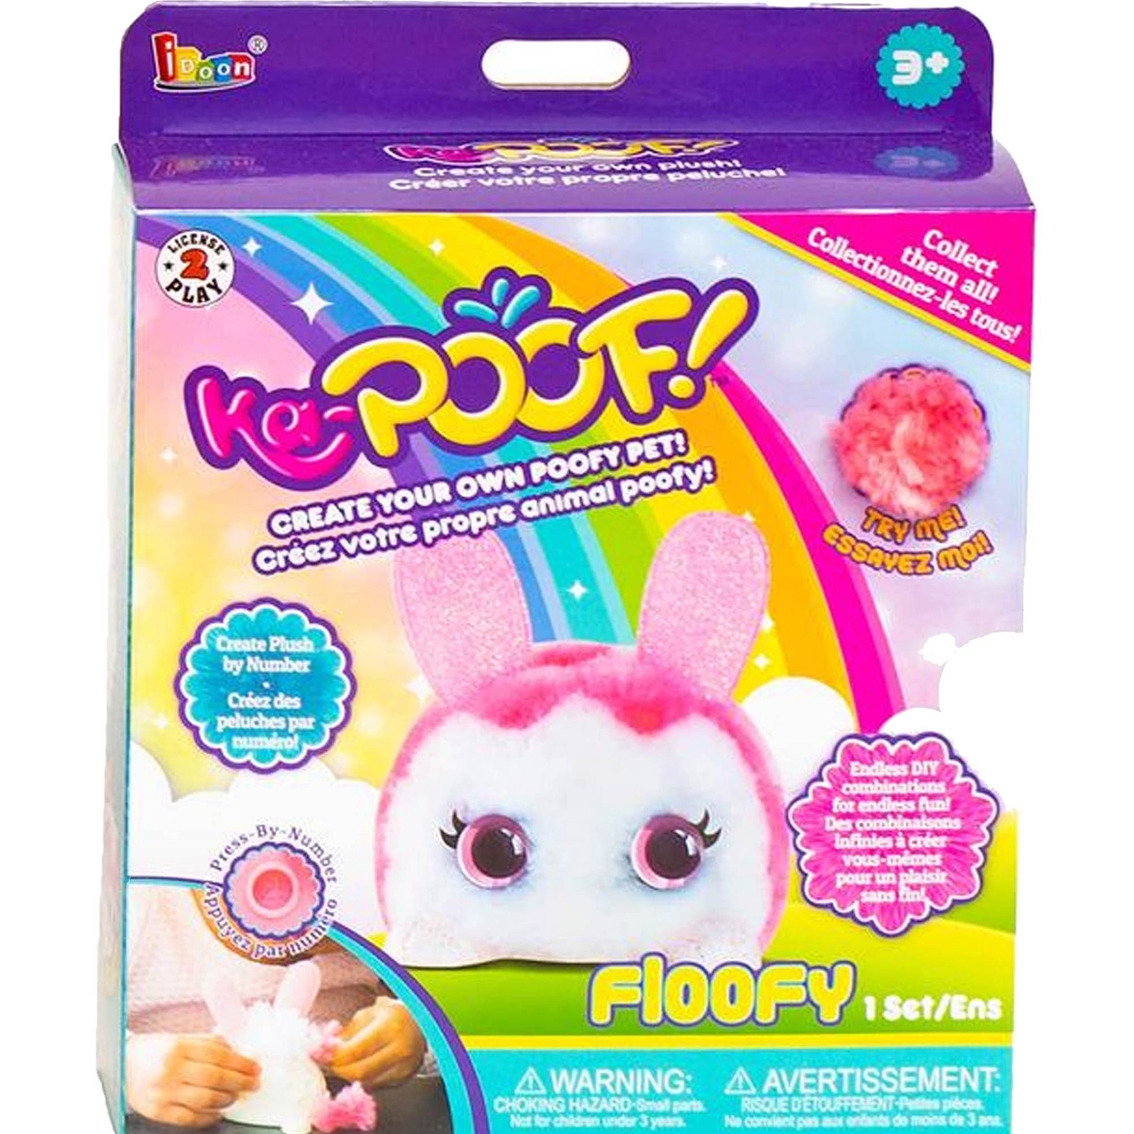 License 2 Play Floofy Kapoofs Pets - Image 1 of 5